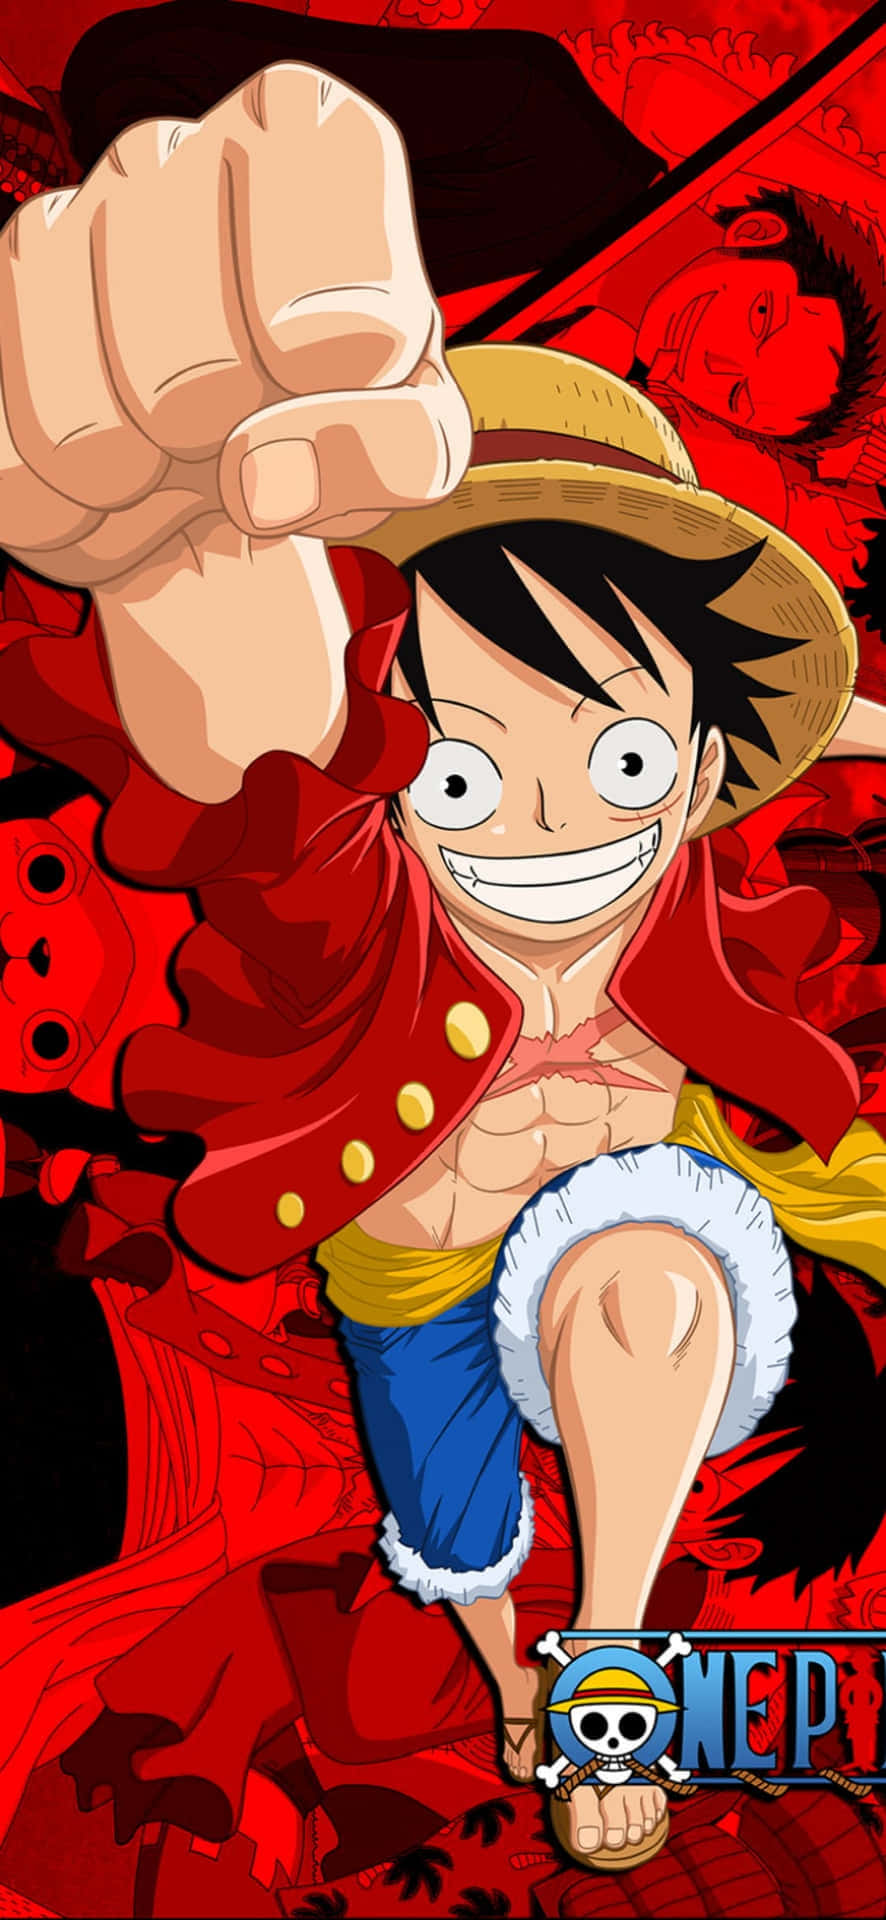 Free Luffy Smile Wallpaper Downloads, [100+] Luffy Smile Wallpapers for  FREE 